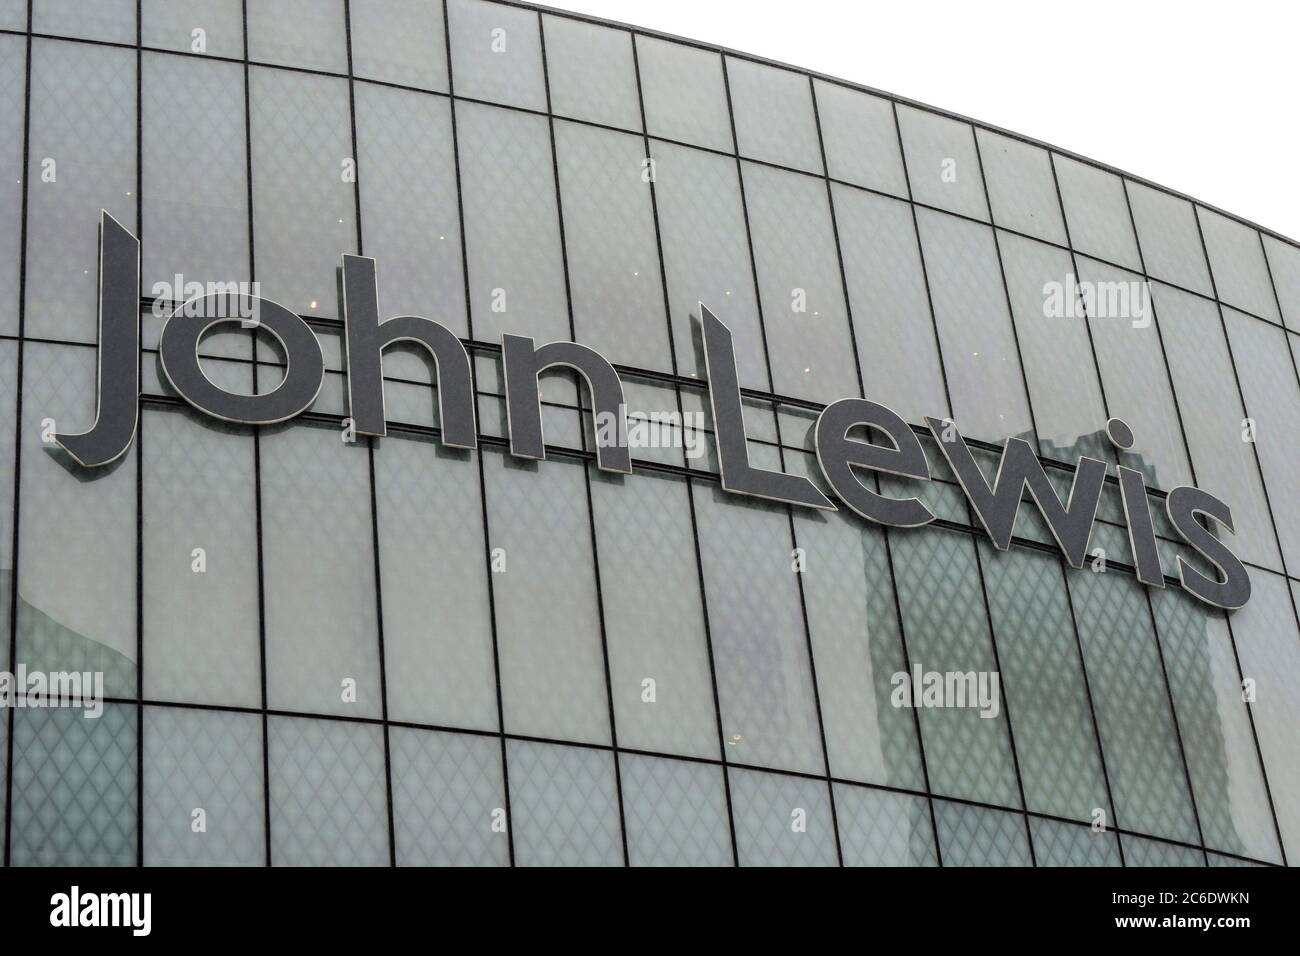 Birmingham, West Midlands, July 9th 2020. John Lewis have announced 8 stores will not reopen, including Birmingham's Grand Central flagship store that was only opened in September 2015 as part of a major £600m transformation of New Street Station. The store was seen as a major success in the JL business. Credit: Sam Holiday/Alamy Live News Stock Photo